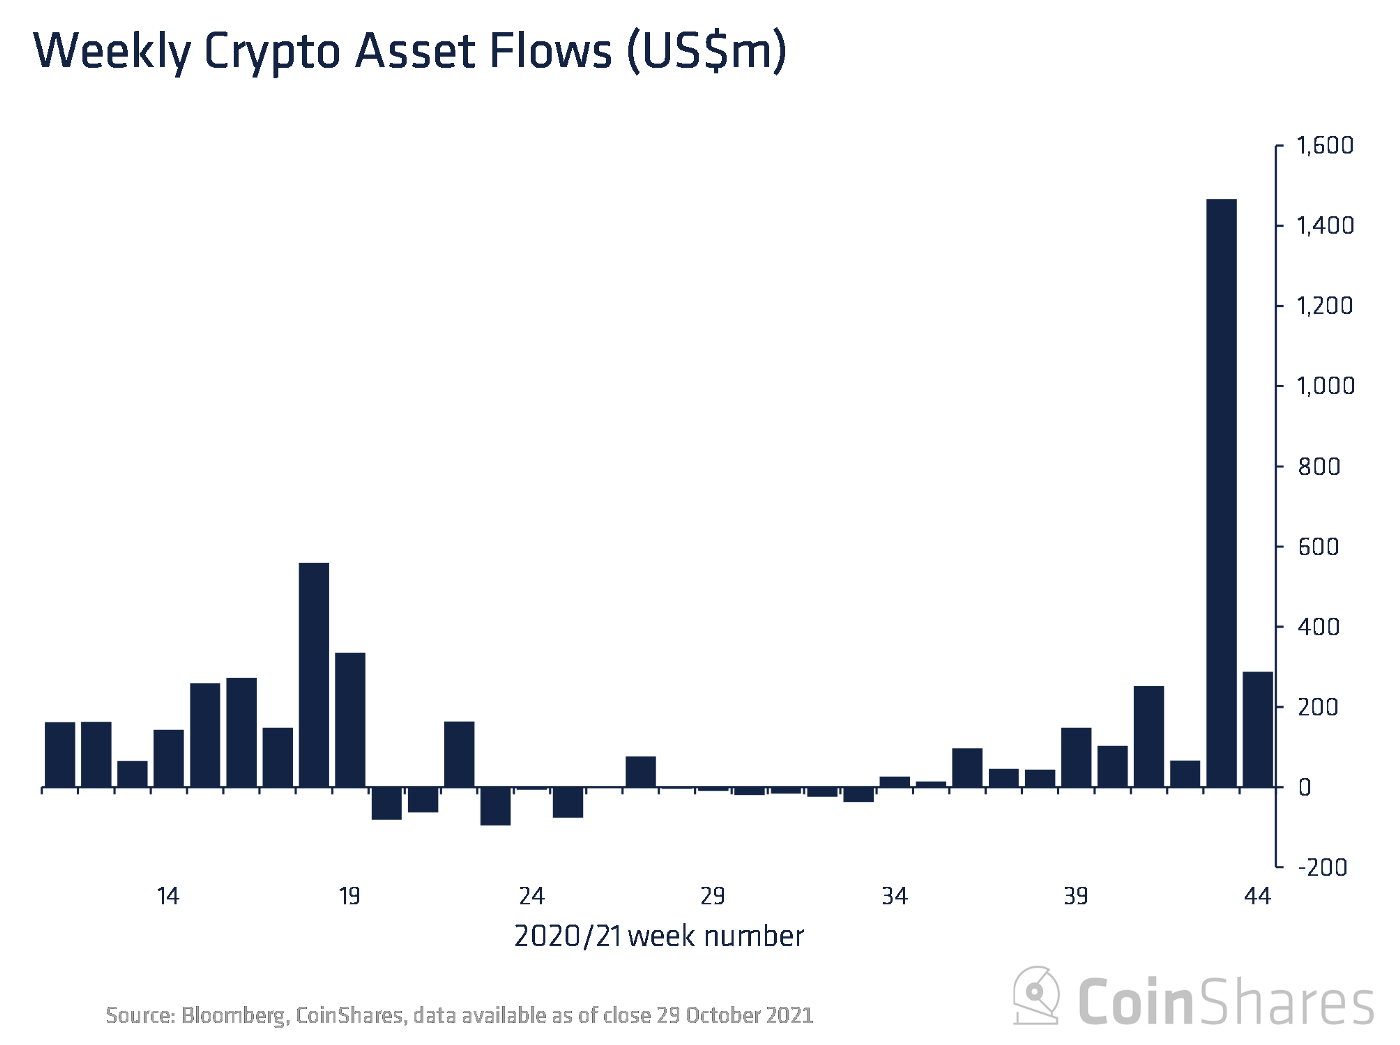 Flow of funds